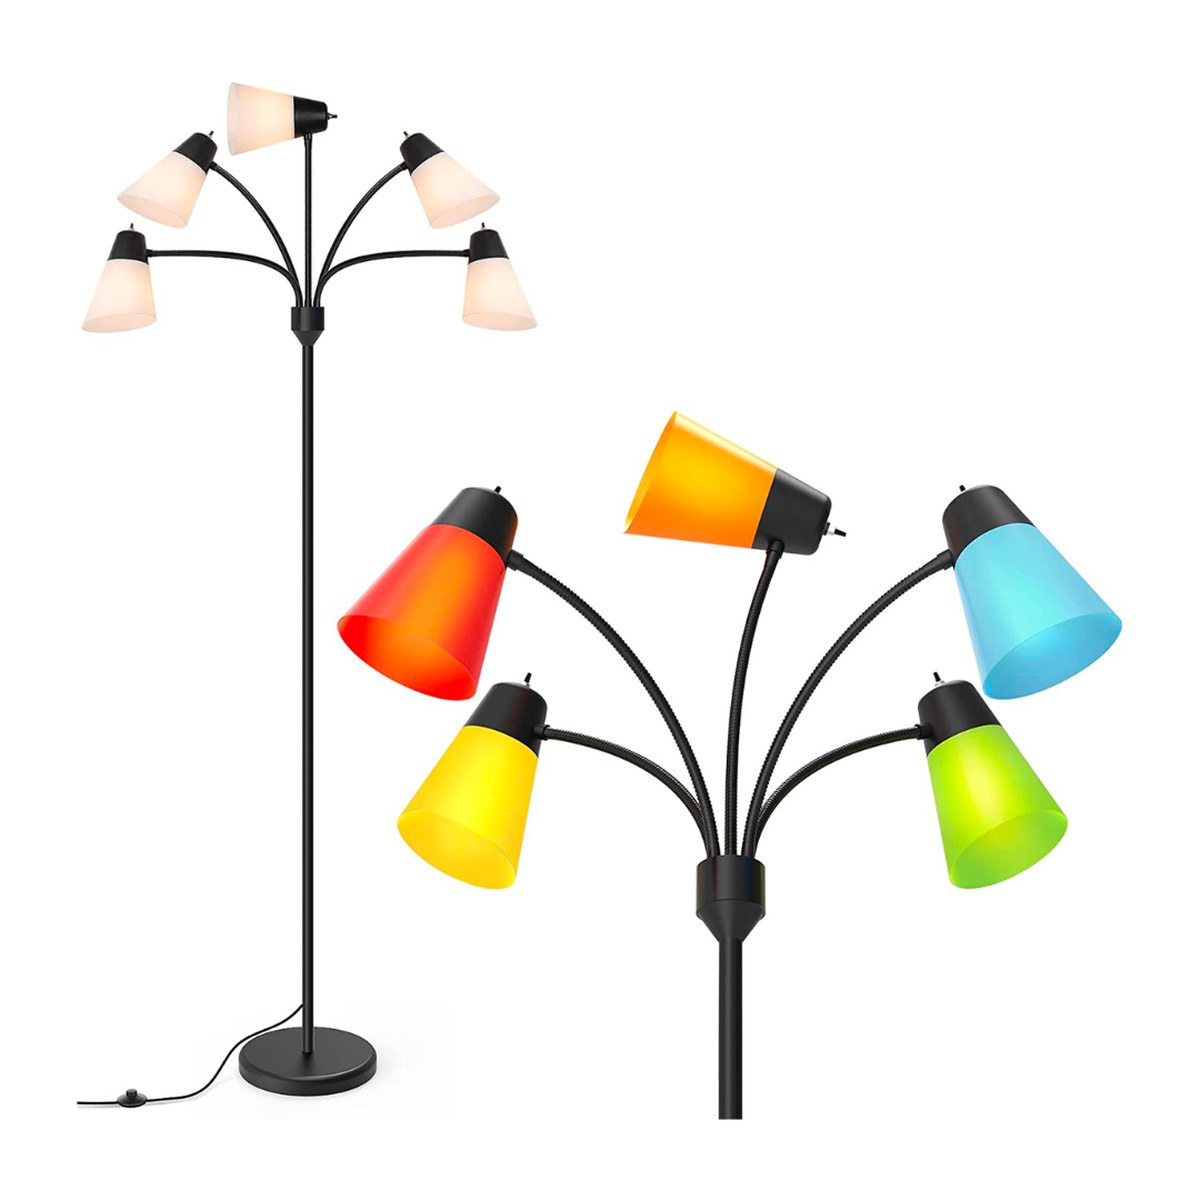 Two FOLKSMATE multi-head LED floor lamps with regular shades and multi-color shades